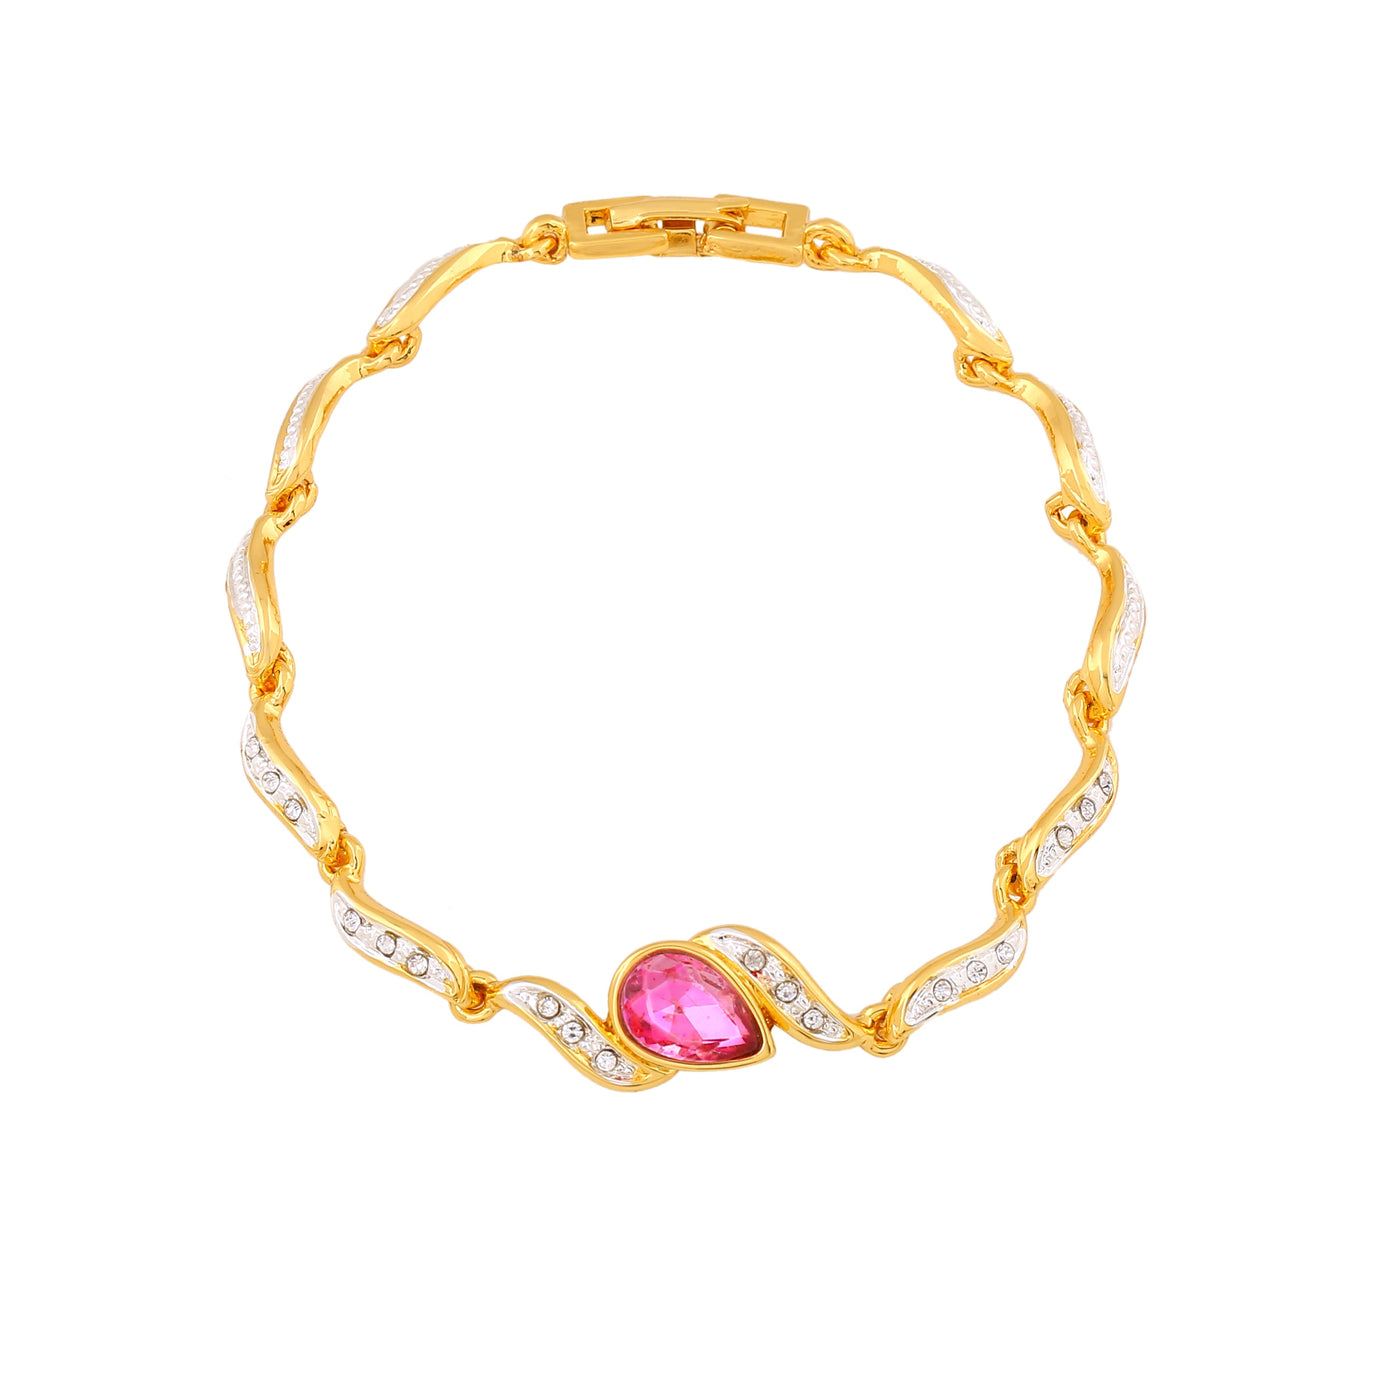 Estele Gold & Rhodium Plated Lovely Bracelet with Crystals for Women